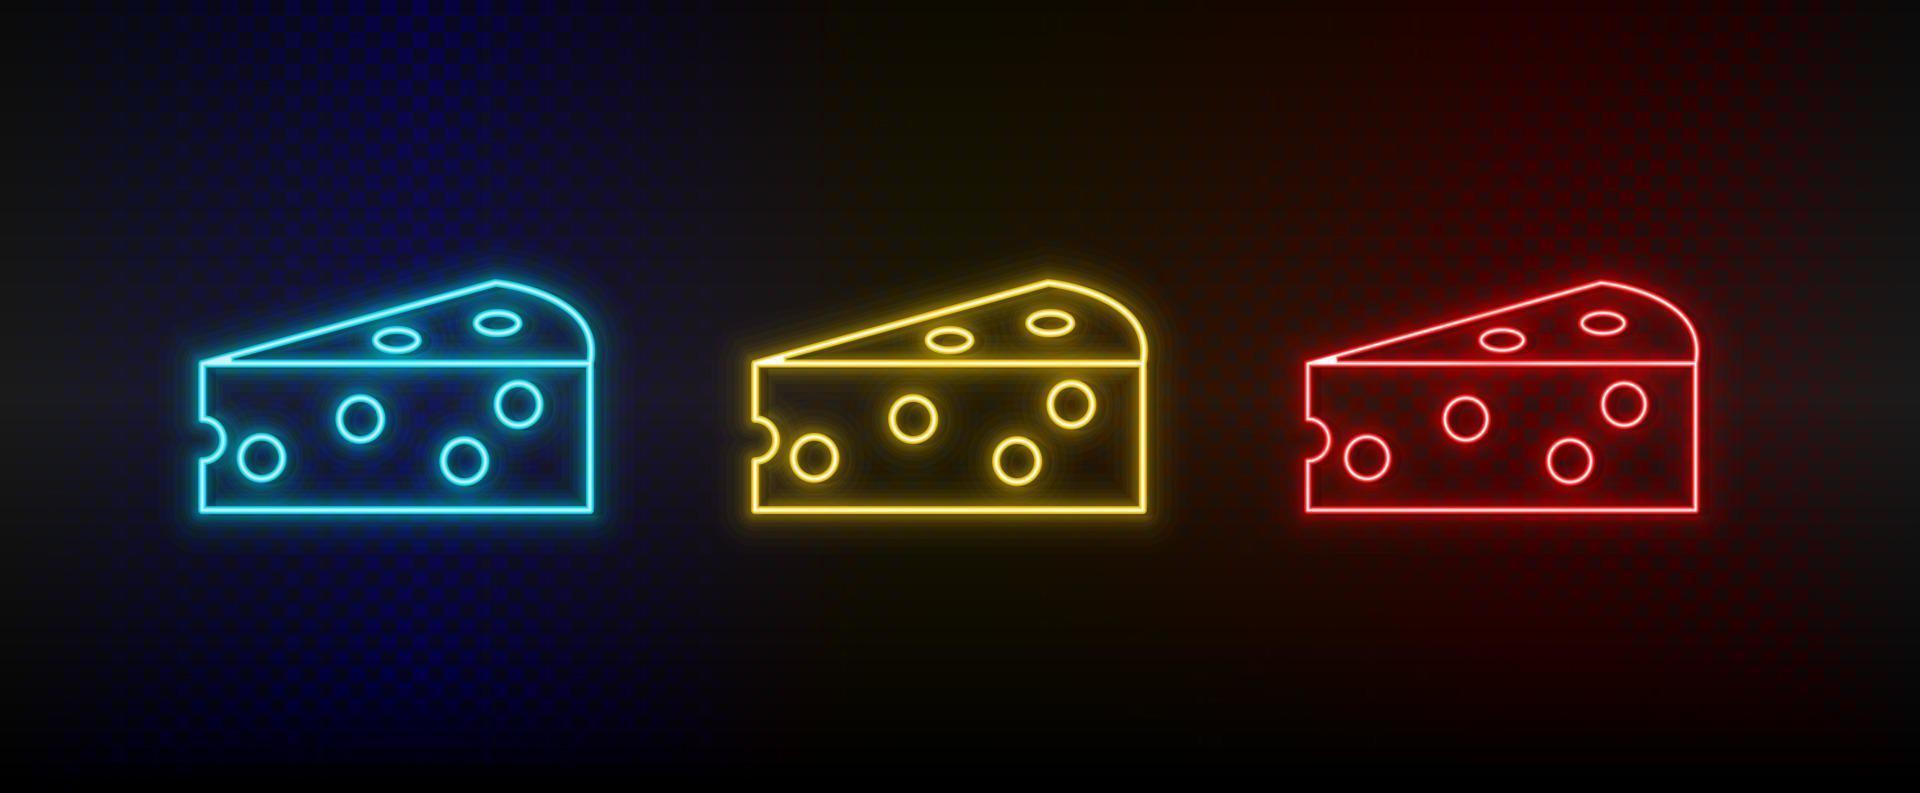 Neon icon set cheese piece. Set of red, blue, yellow neon vector icon on dark background